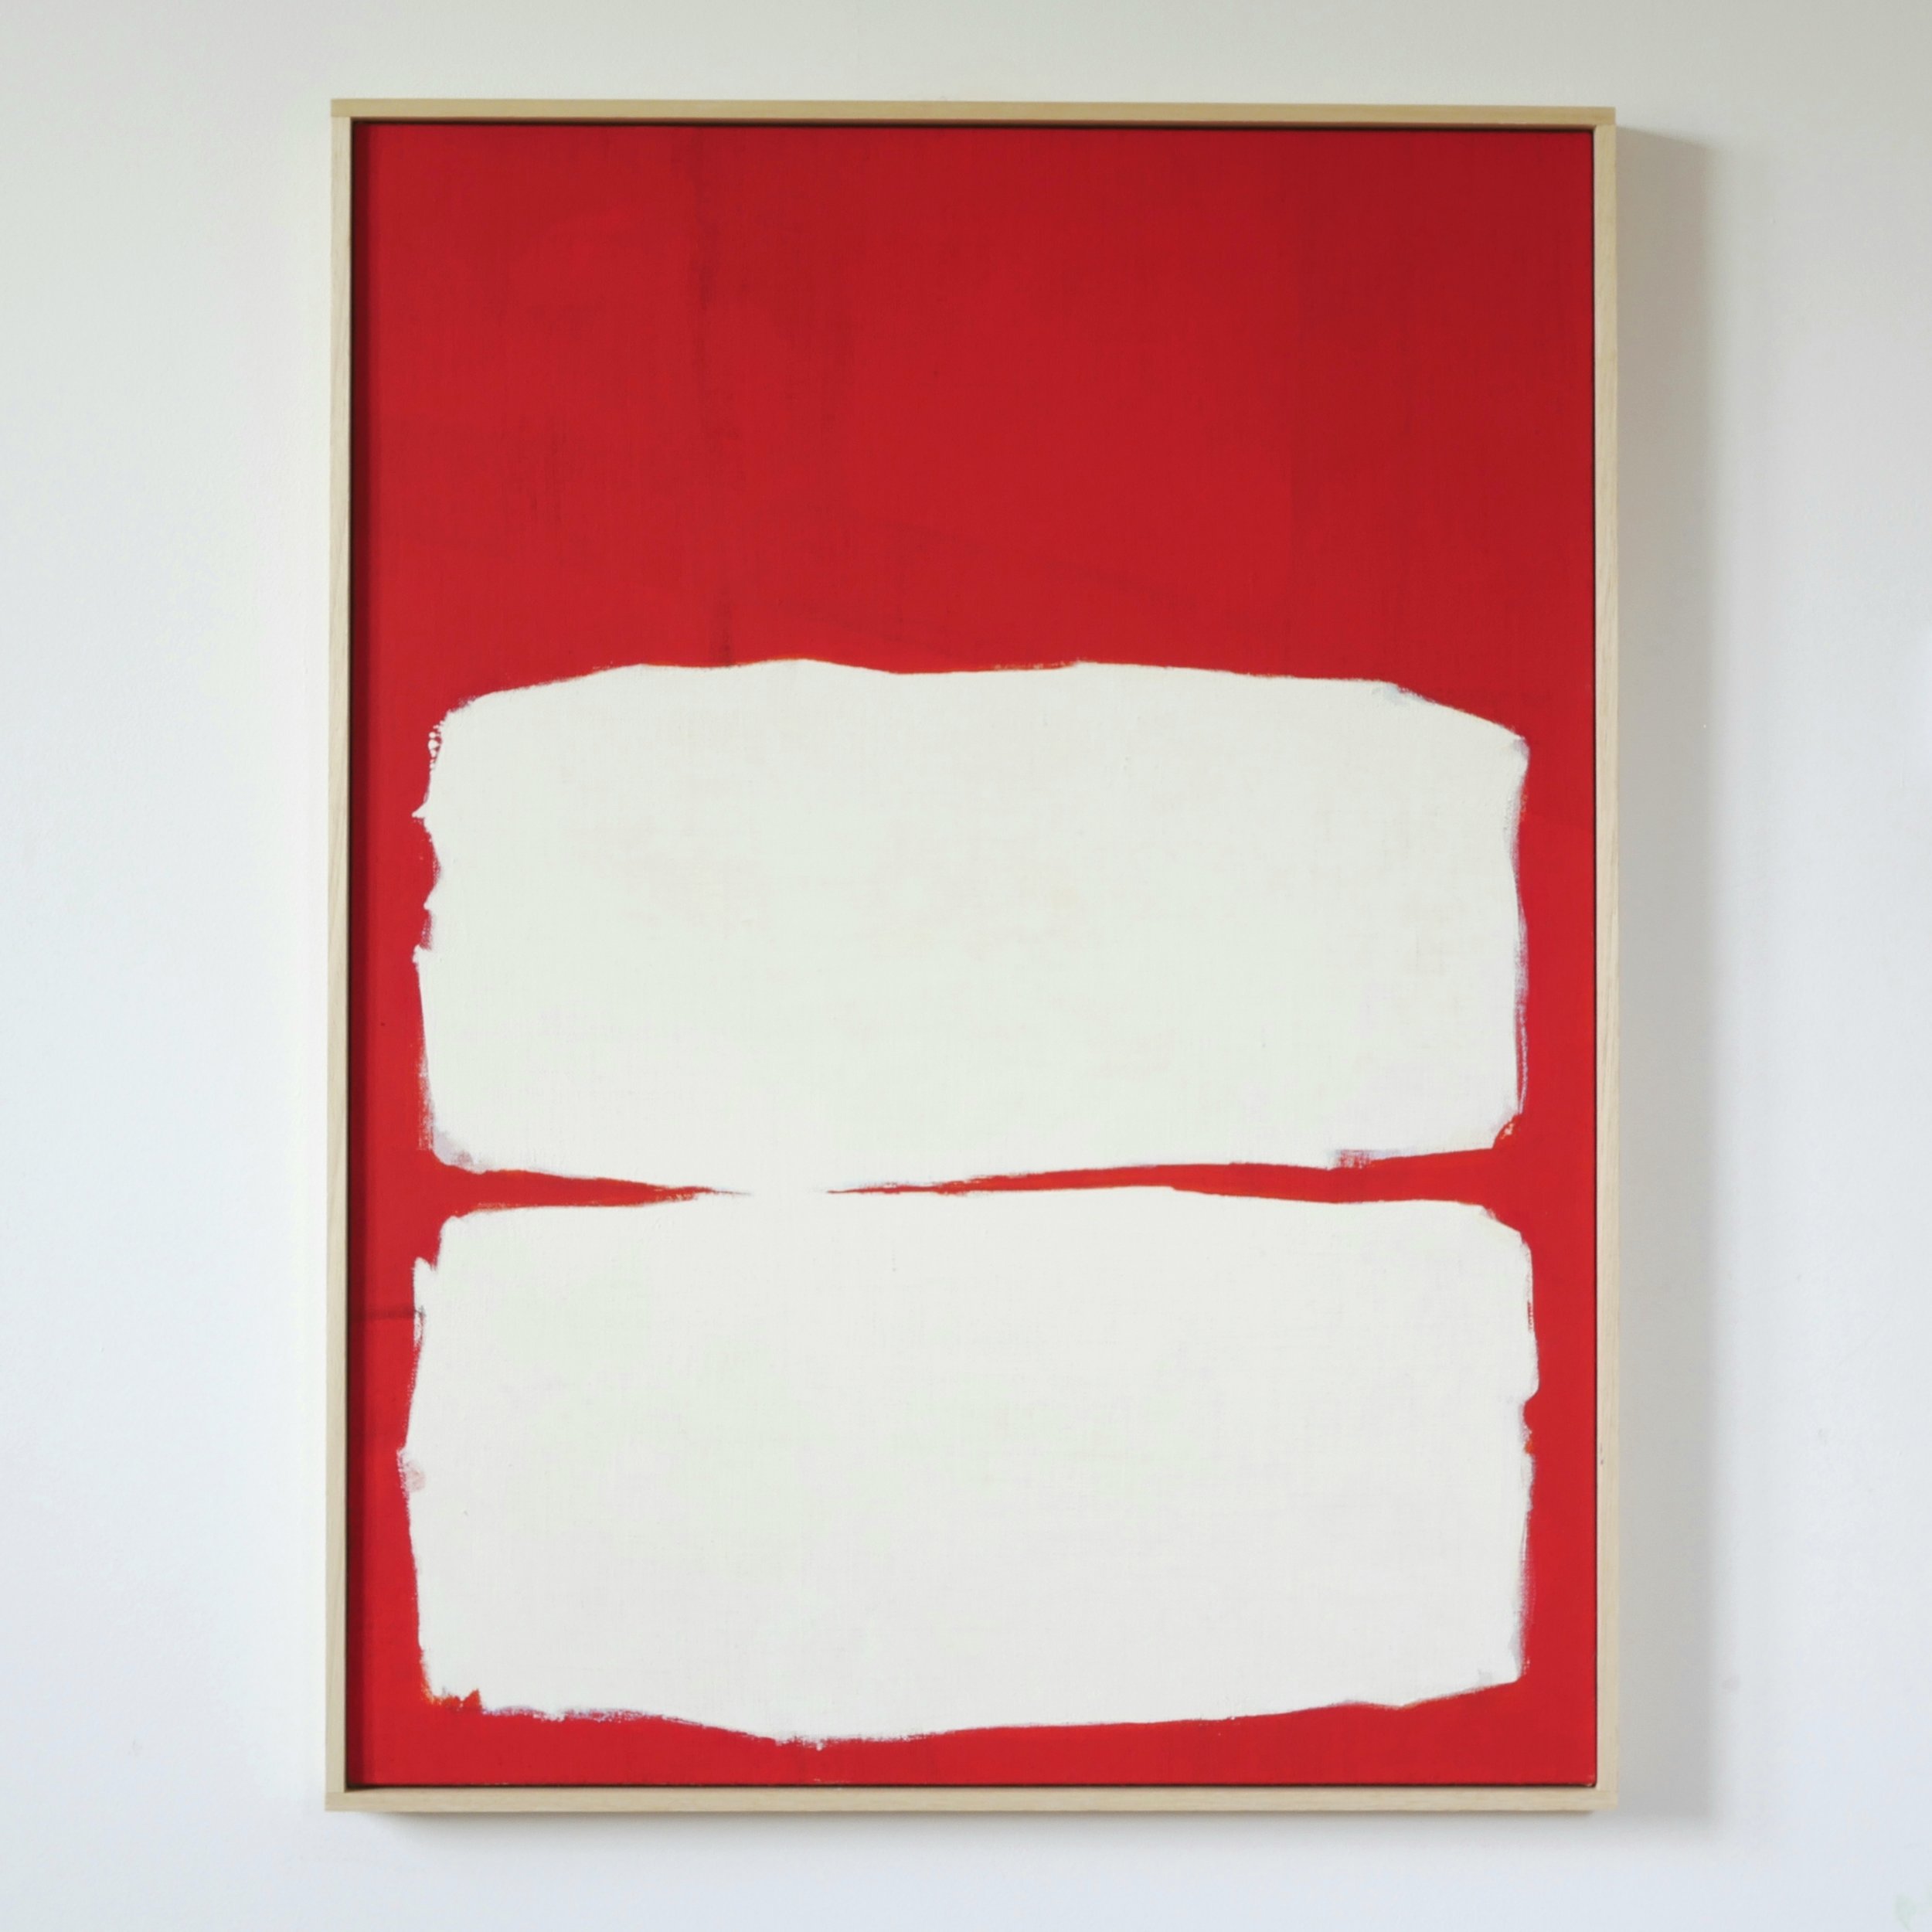 Over the Red - 60x80cm - Ludovic Philippon - 2019.jpg